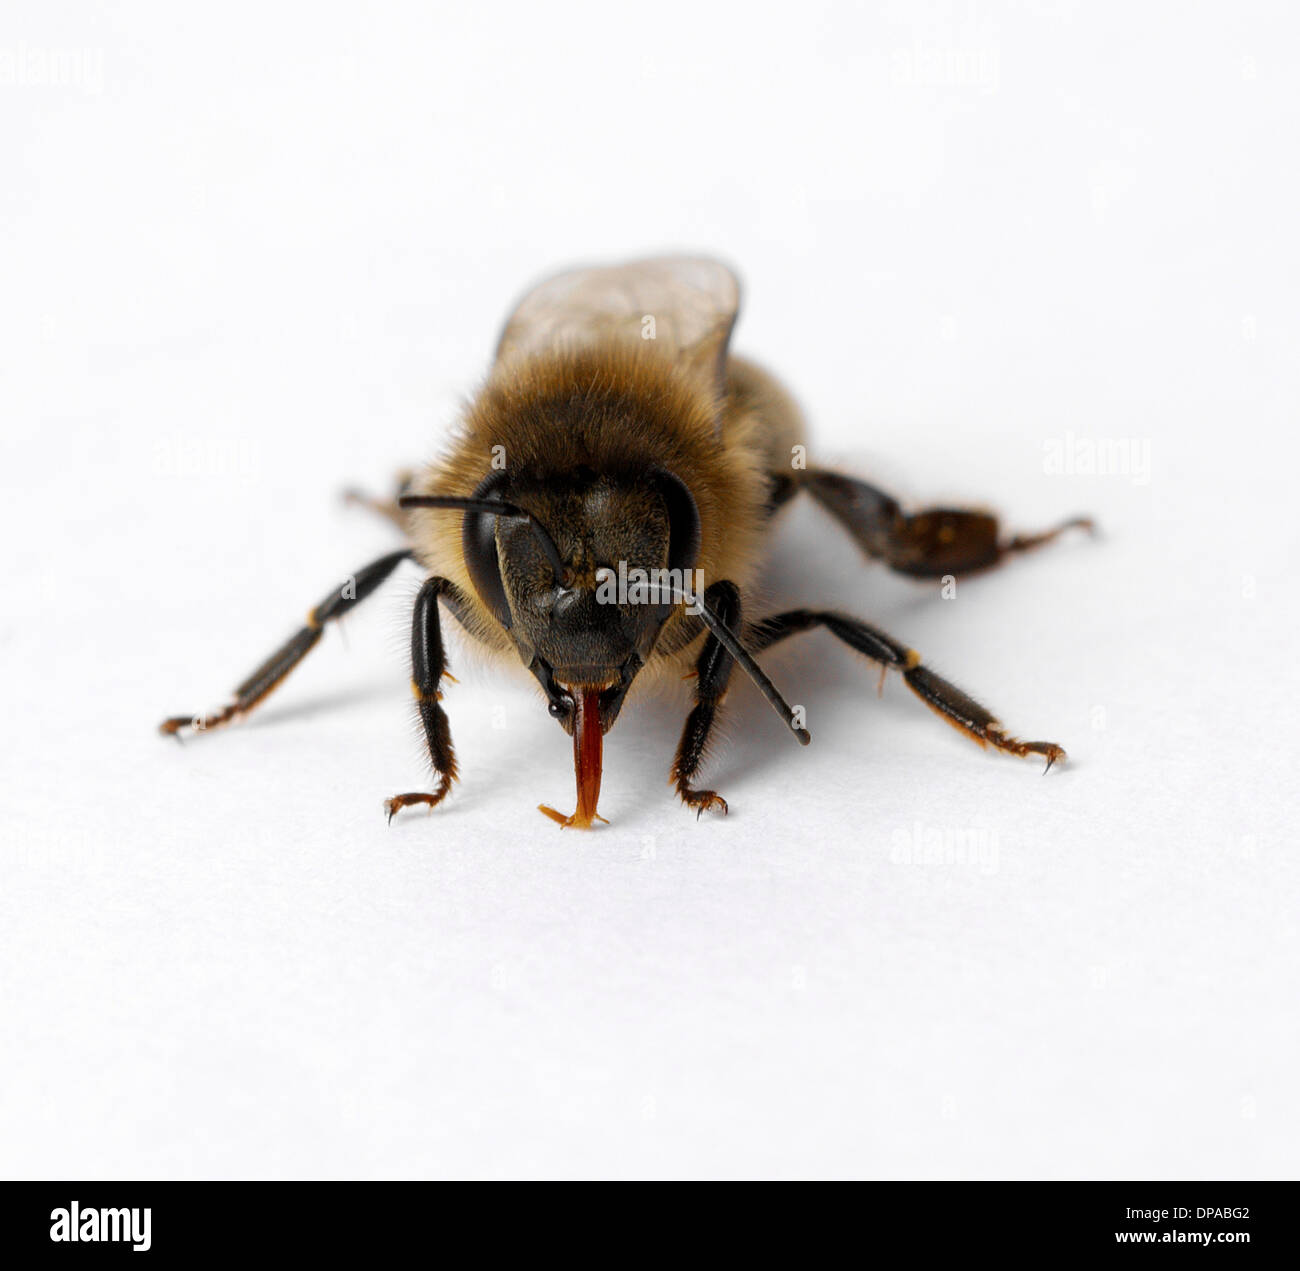 Honey bee with tongue out Stock Photo